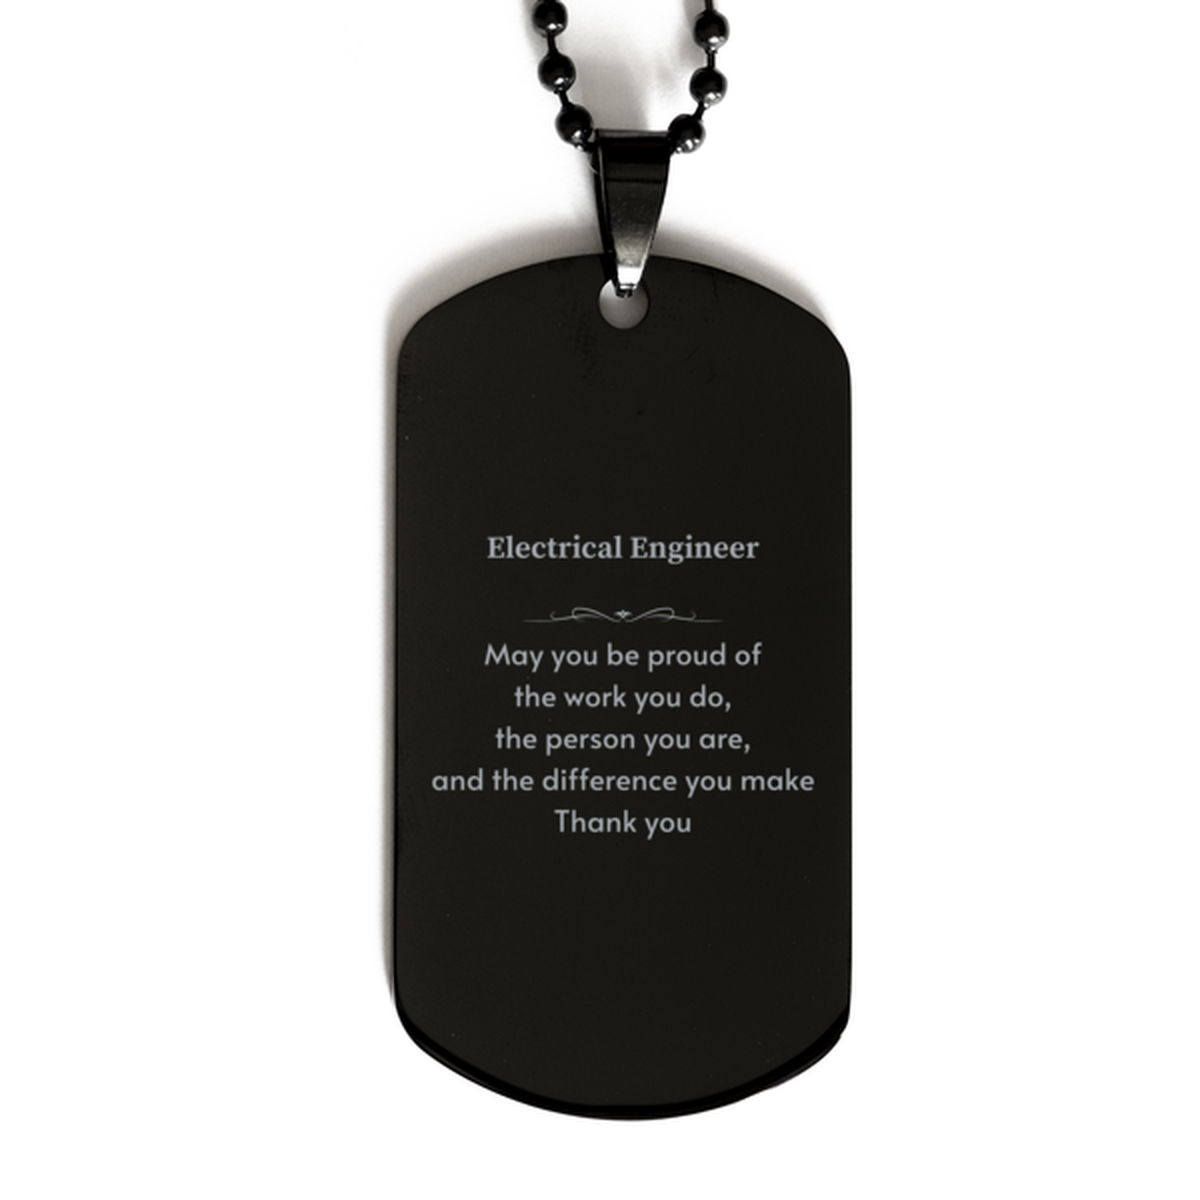 Heartwarming Black Dog Tag Retirement Coworkers Gifts for Electrical Engineer, Electrical Engineer May You be proud of the work you do, the person you are Gifts for Boss Men Women Friends